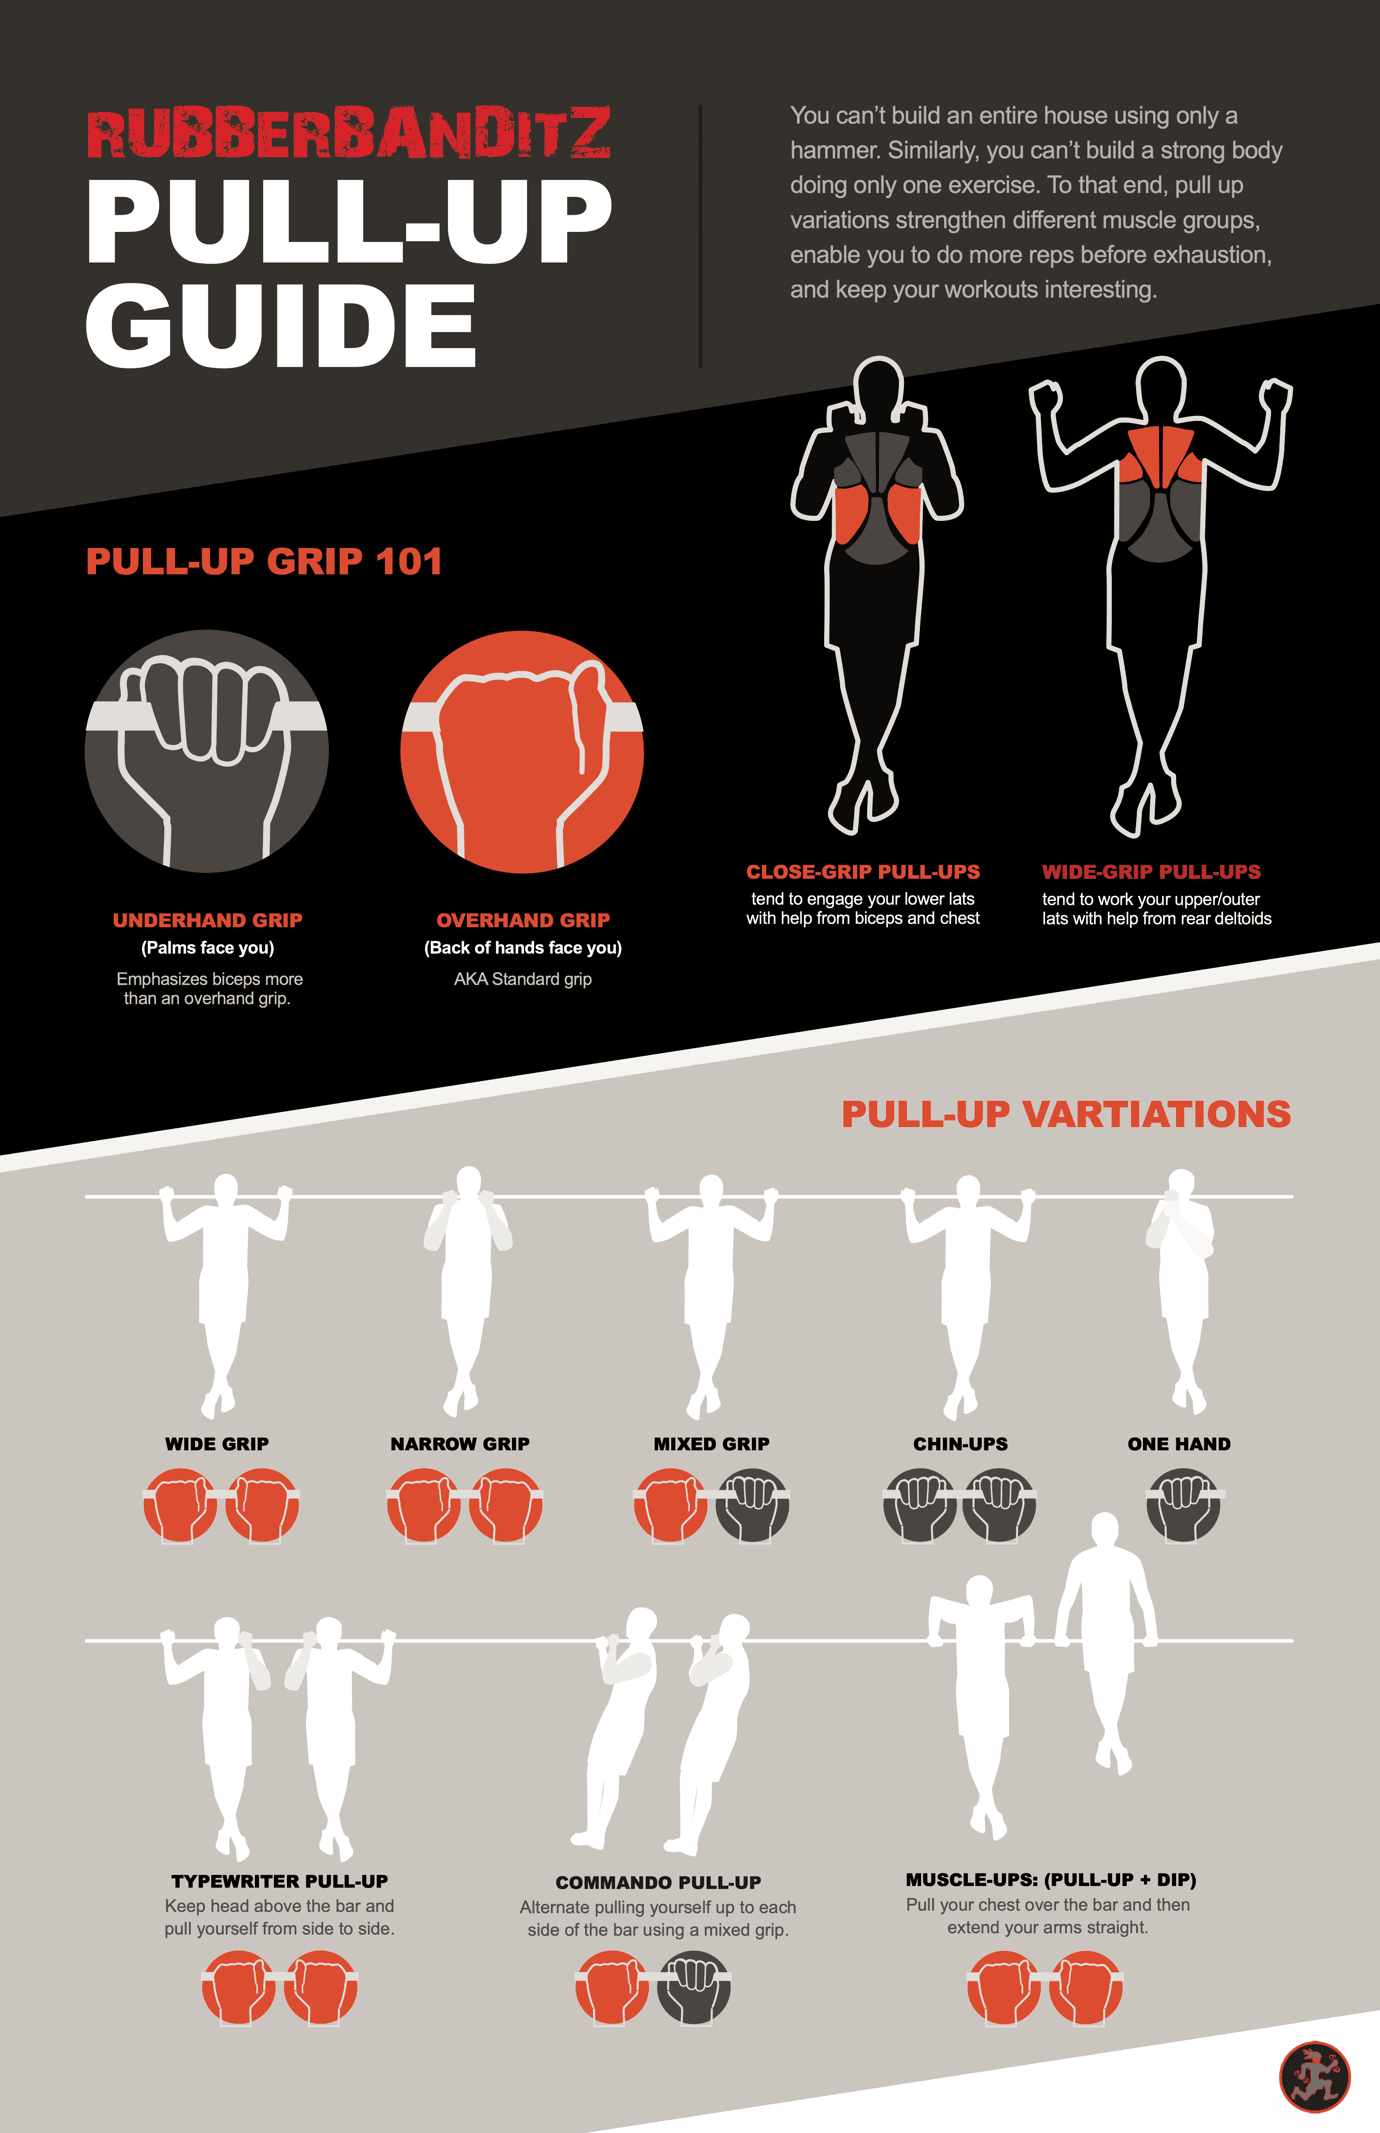 The Top 10 Benefits of Pull-Ups